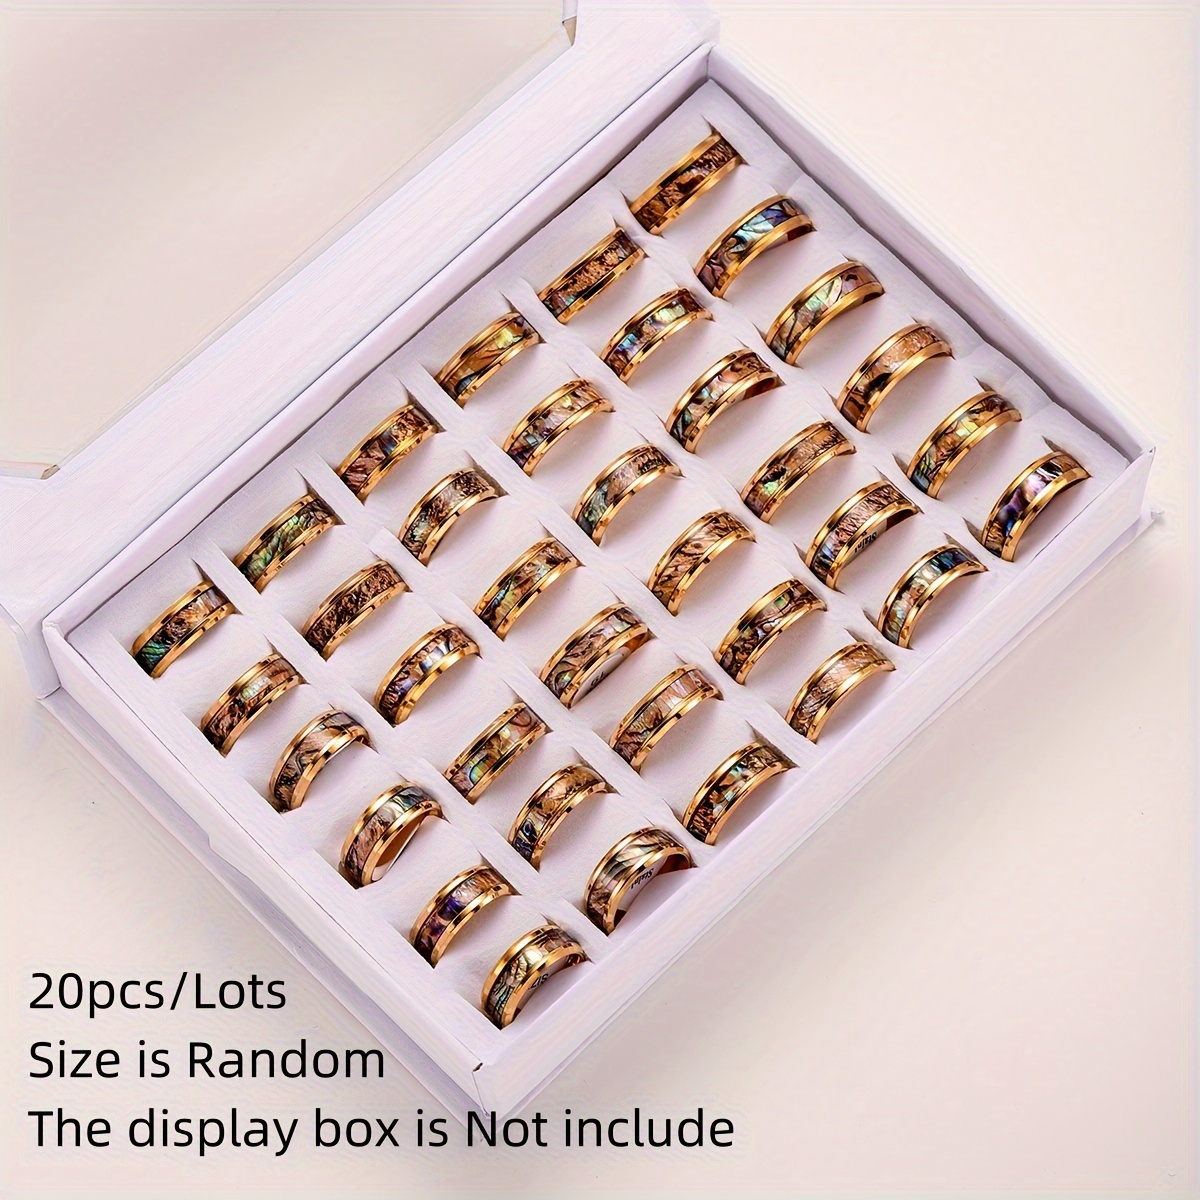 

Wholesale 20pcs/lot Fashion Gold Plated Sparkling Shell Stainless Steel Rings For Women Men Mix Style Wedding Party Finger Jewelry (size 17-21mm Random, Box Is Not Include)